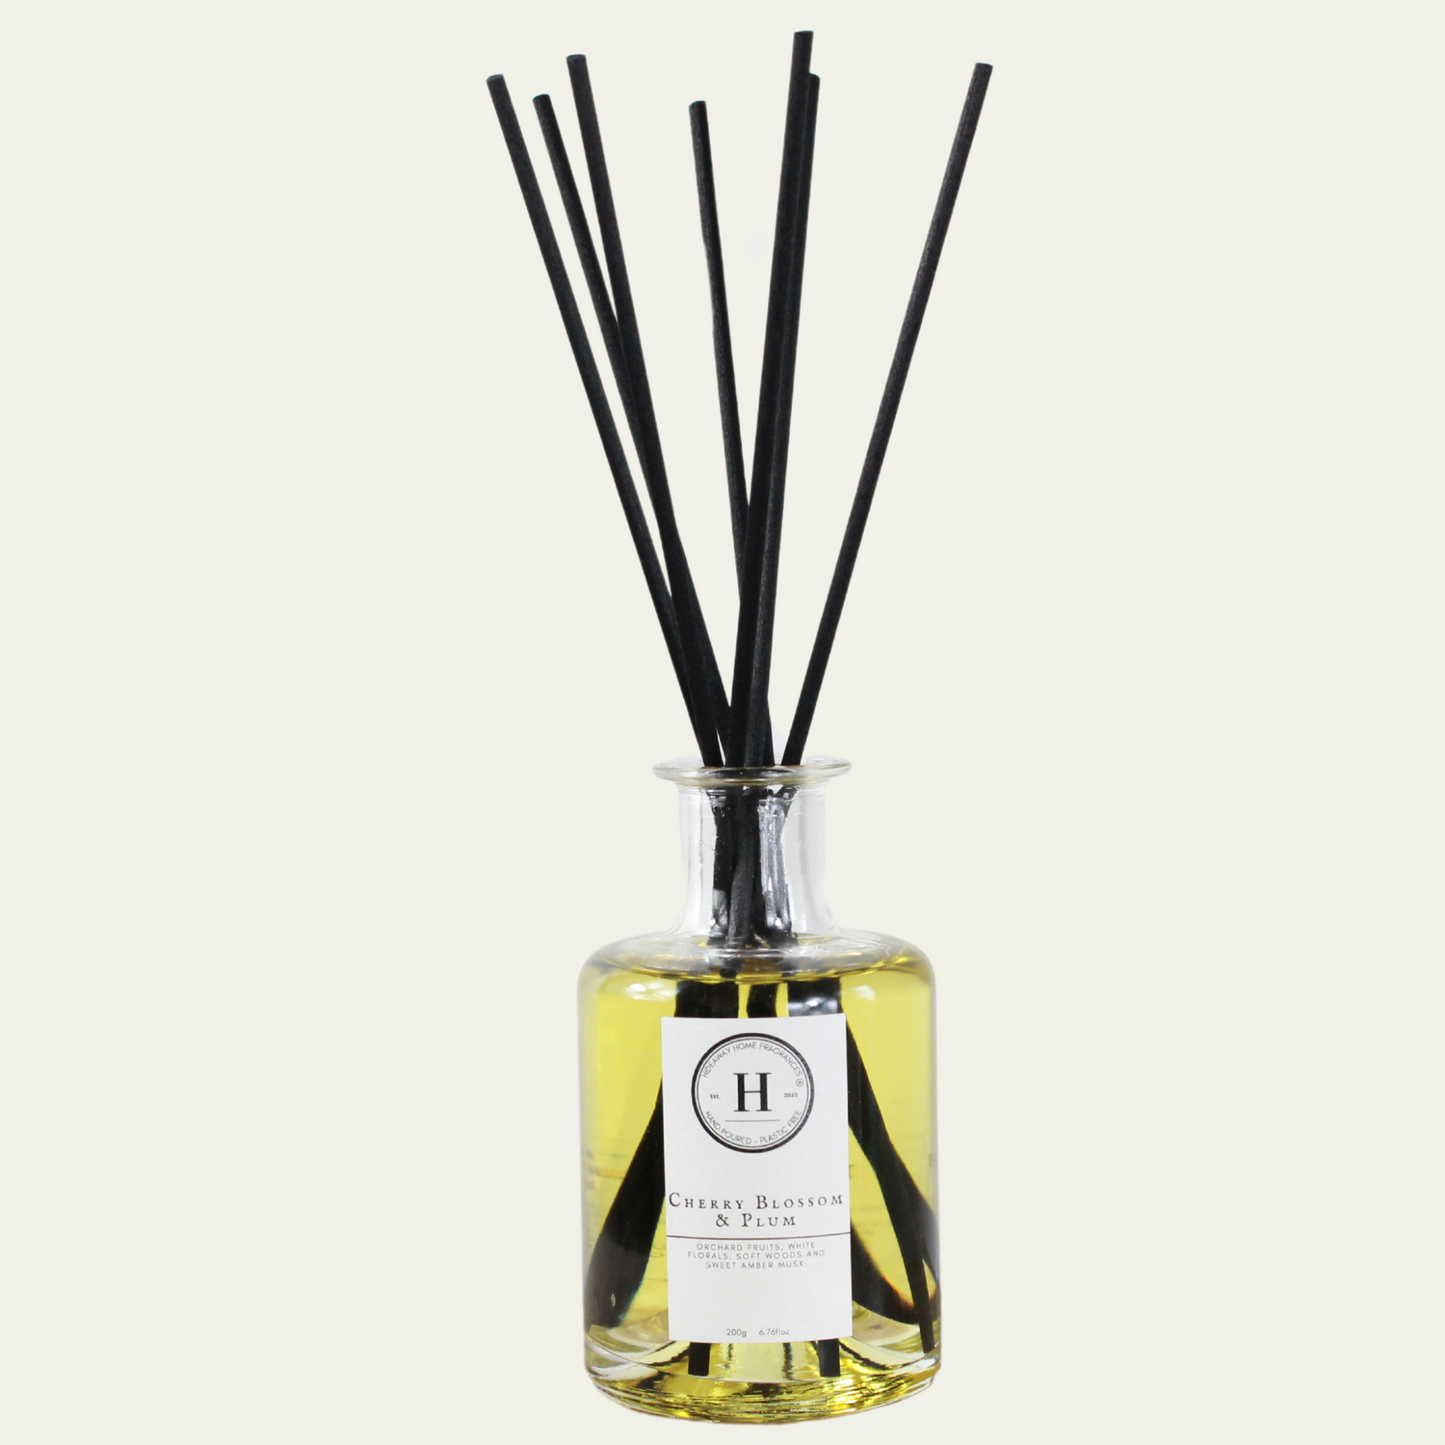 Cherry Blossom & Plum Reed Diffuser - Hideaway Home Fragrances